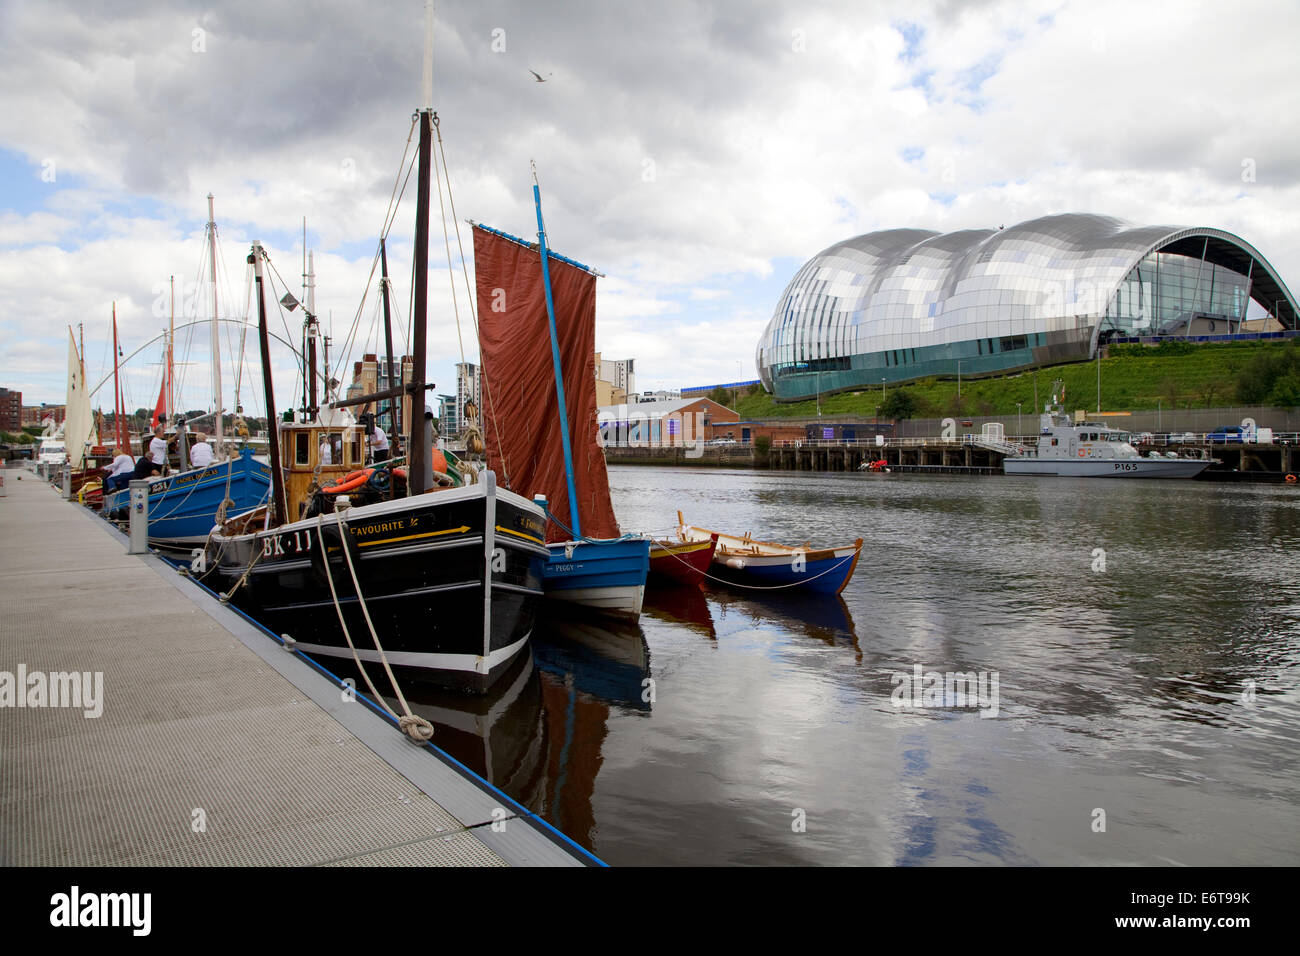 Old sailing boats gathered for a festival at the quayside on the River Tyne in Newcastle. Stock Photo